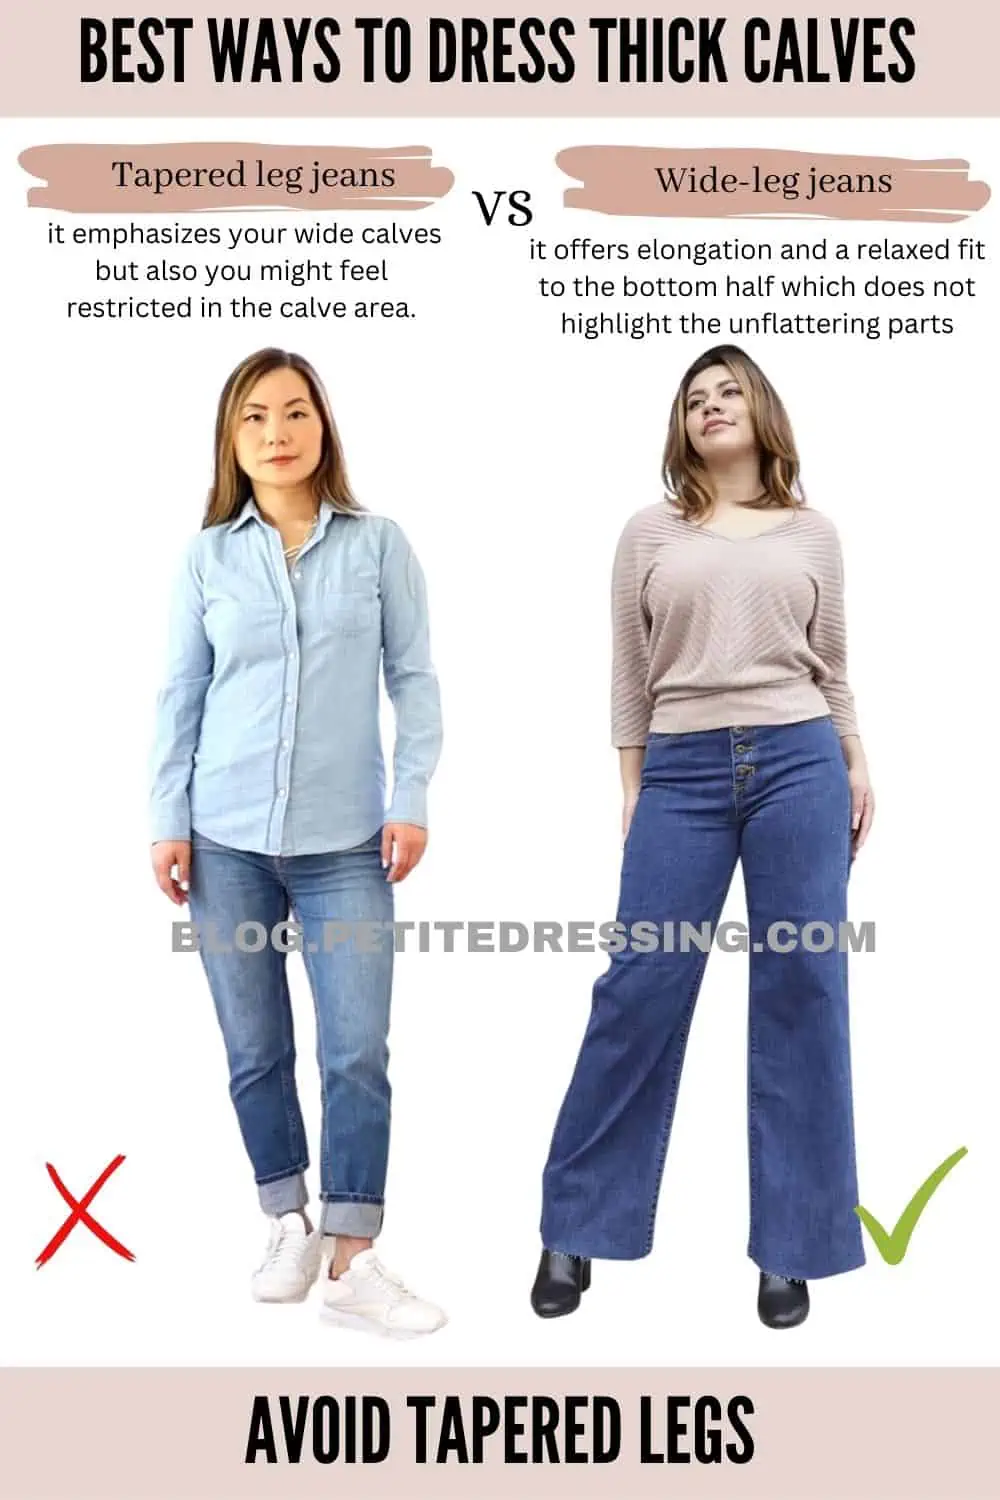 Would you ever wear two pants on top of each other